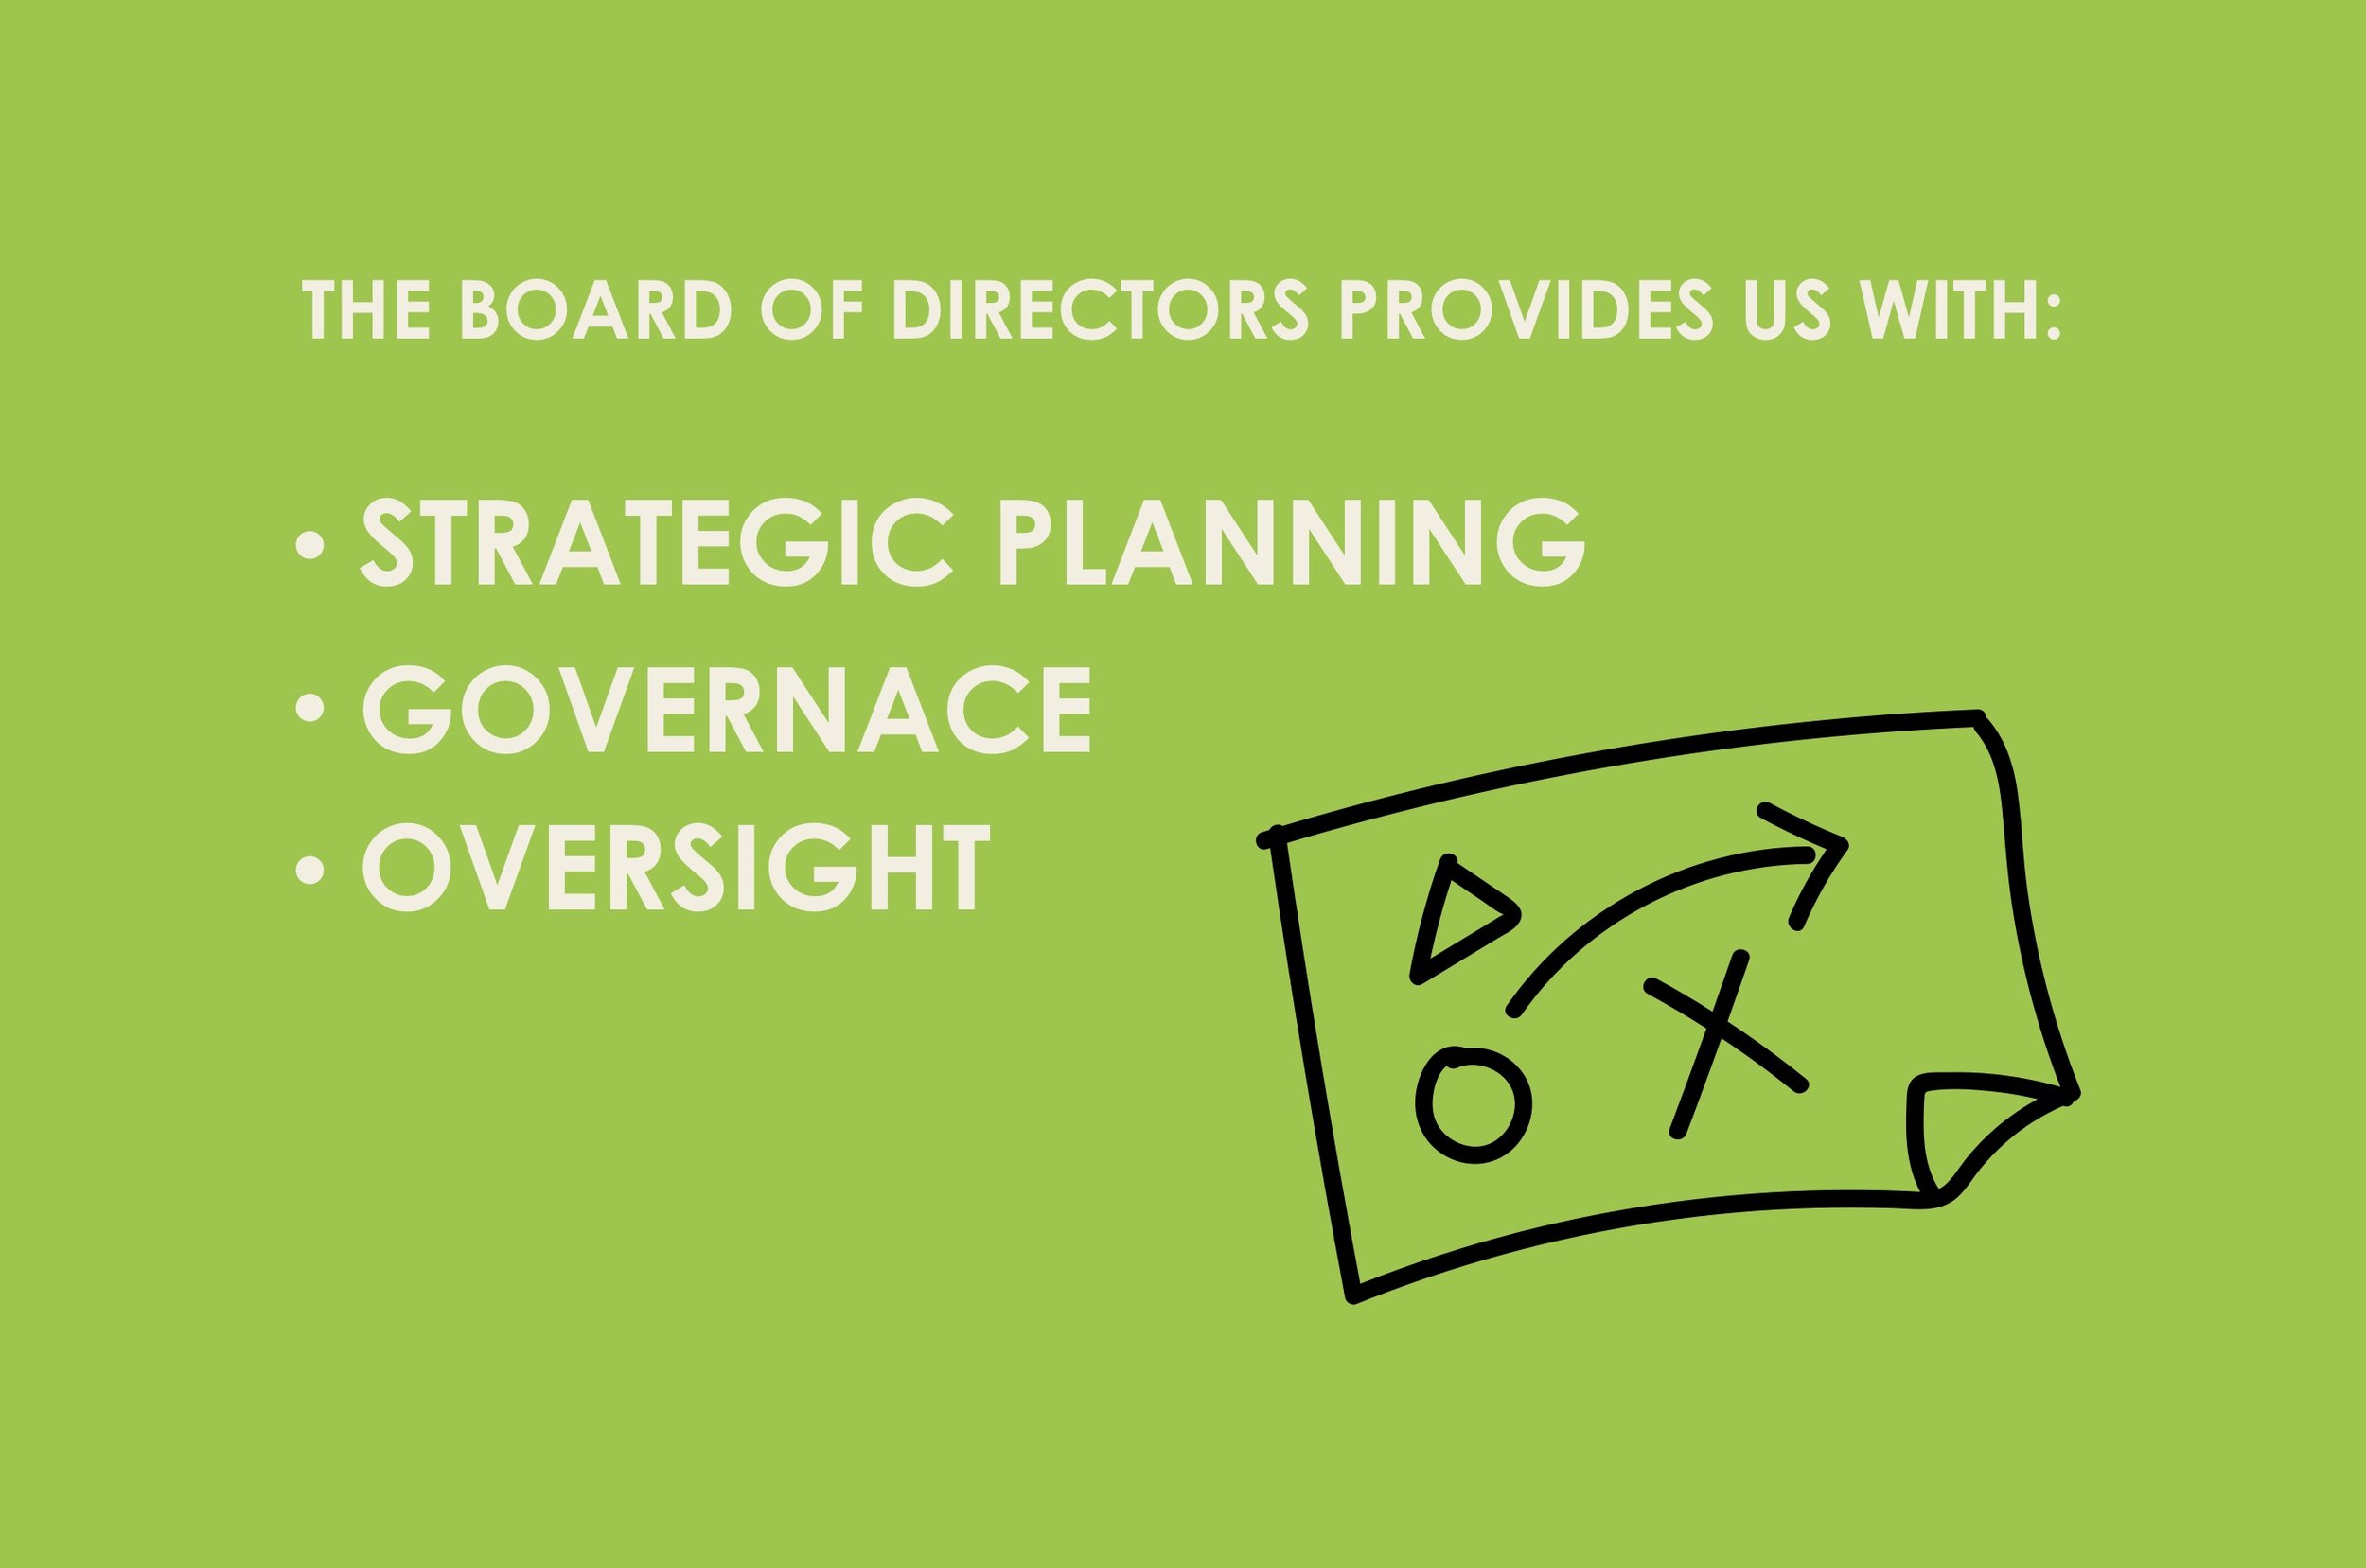 The board of directors provide us with, strategic planning, governance, oversight.